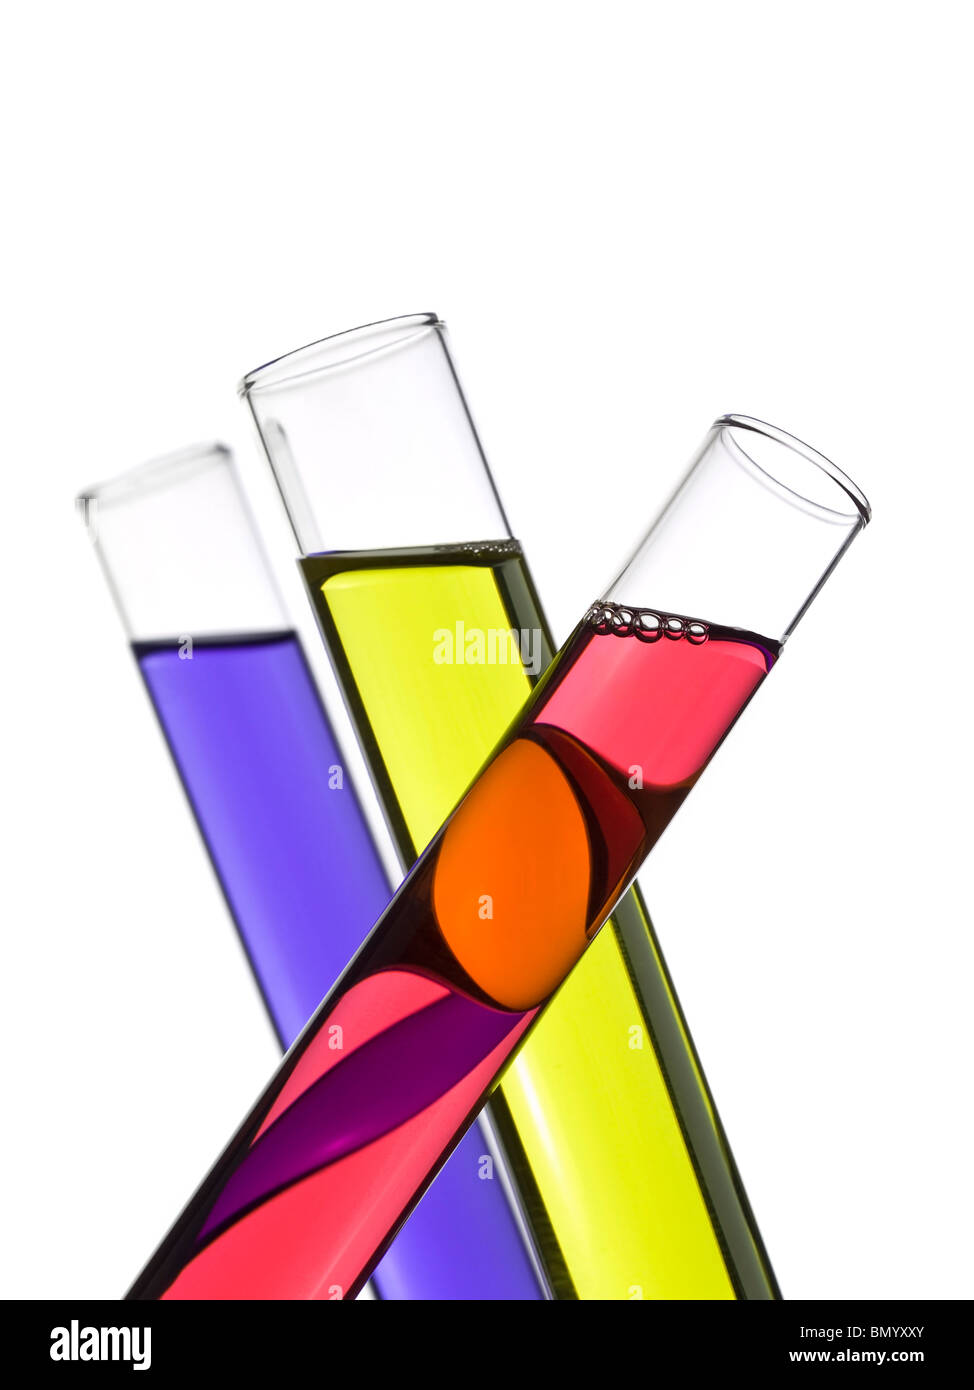 Three test tubes filled with colored liquids. Isolated on white. Stock Photo